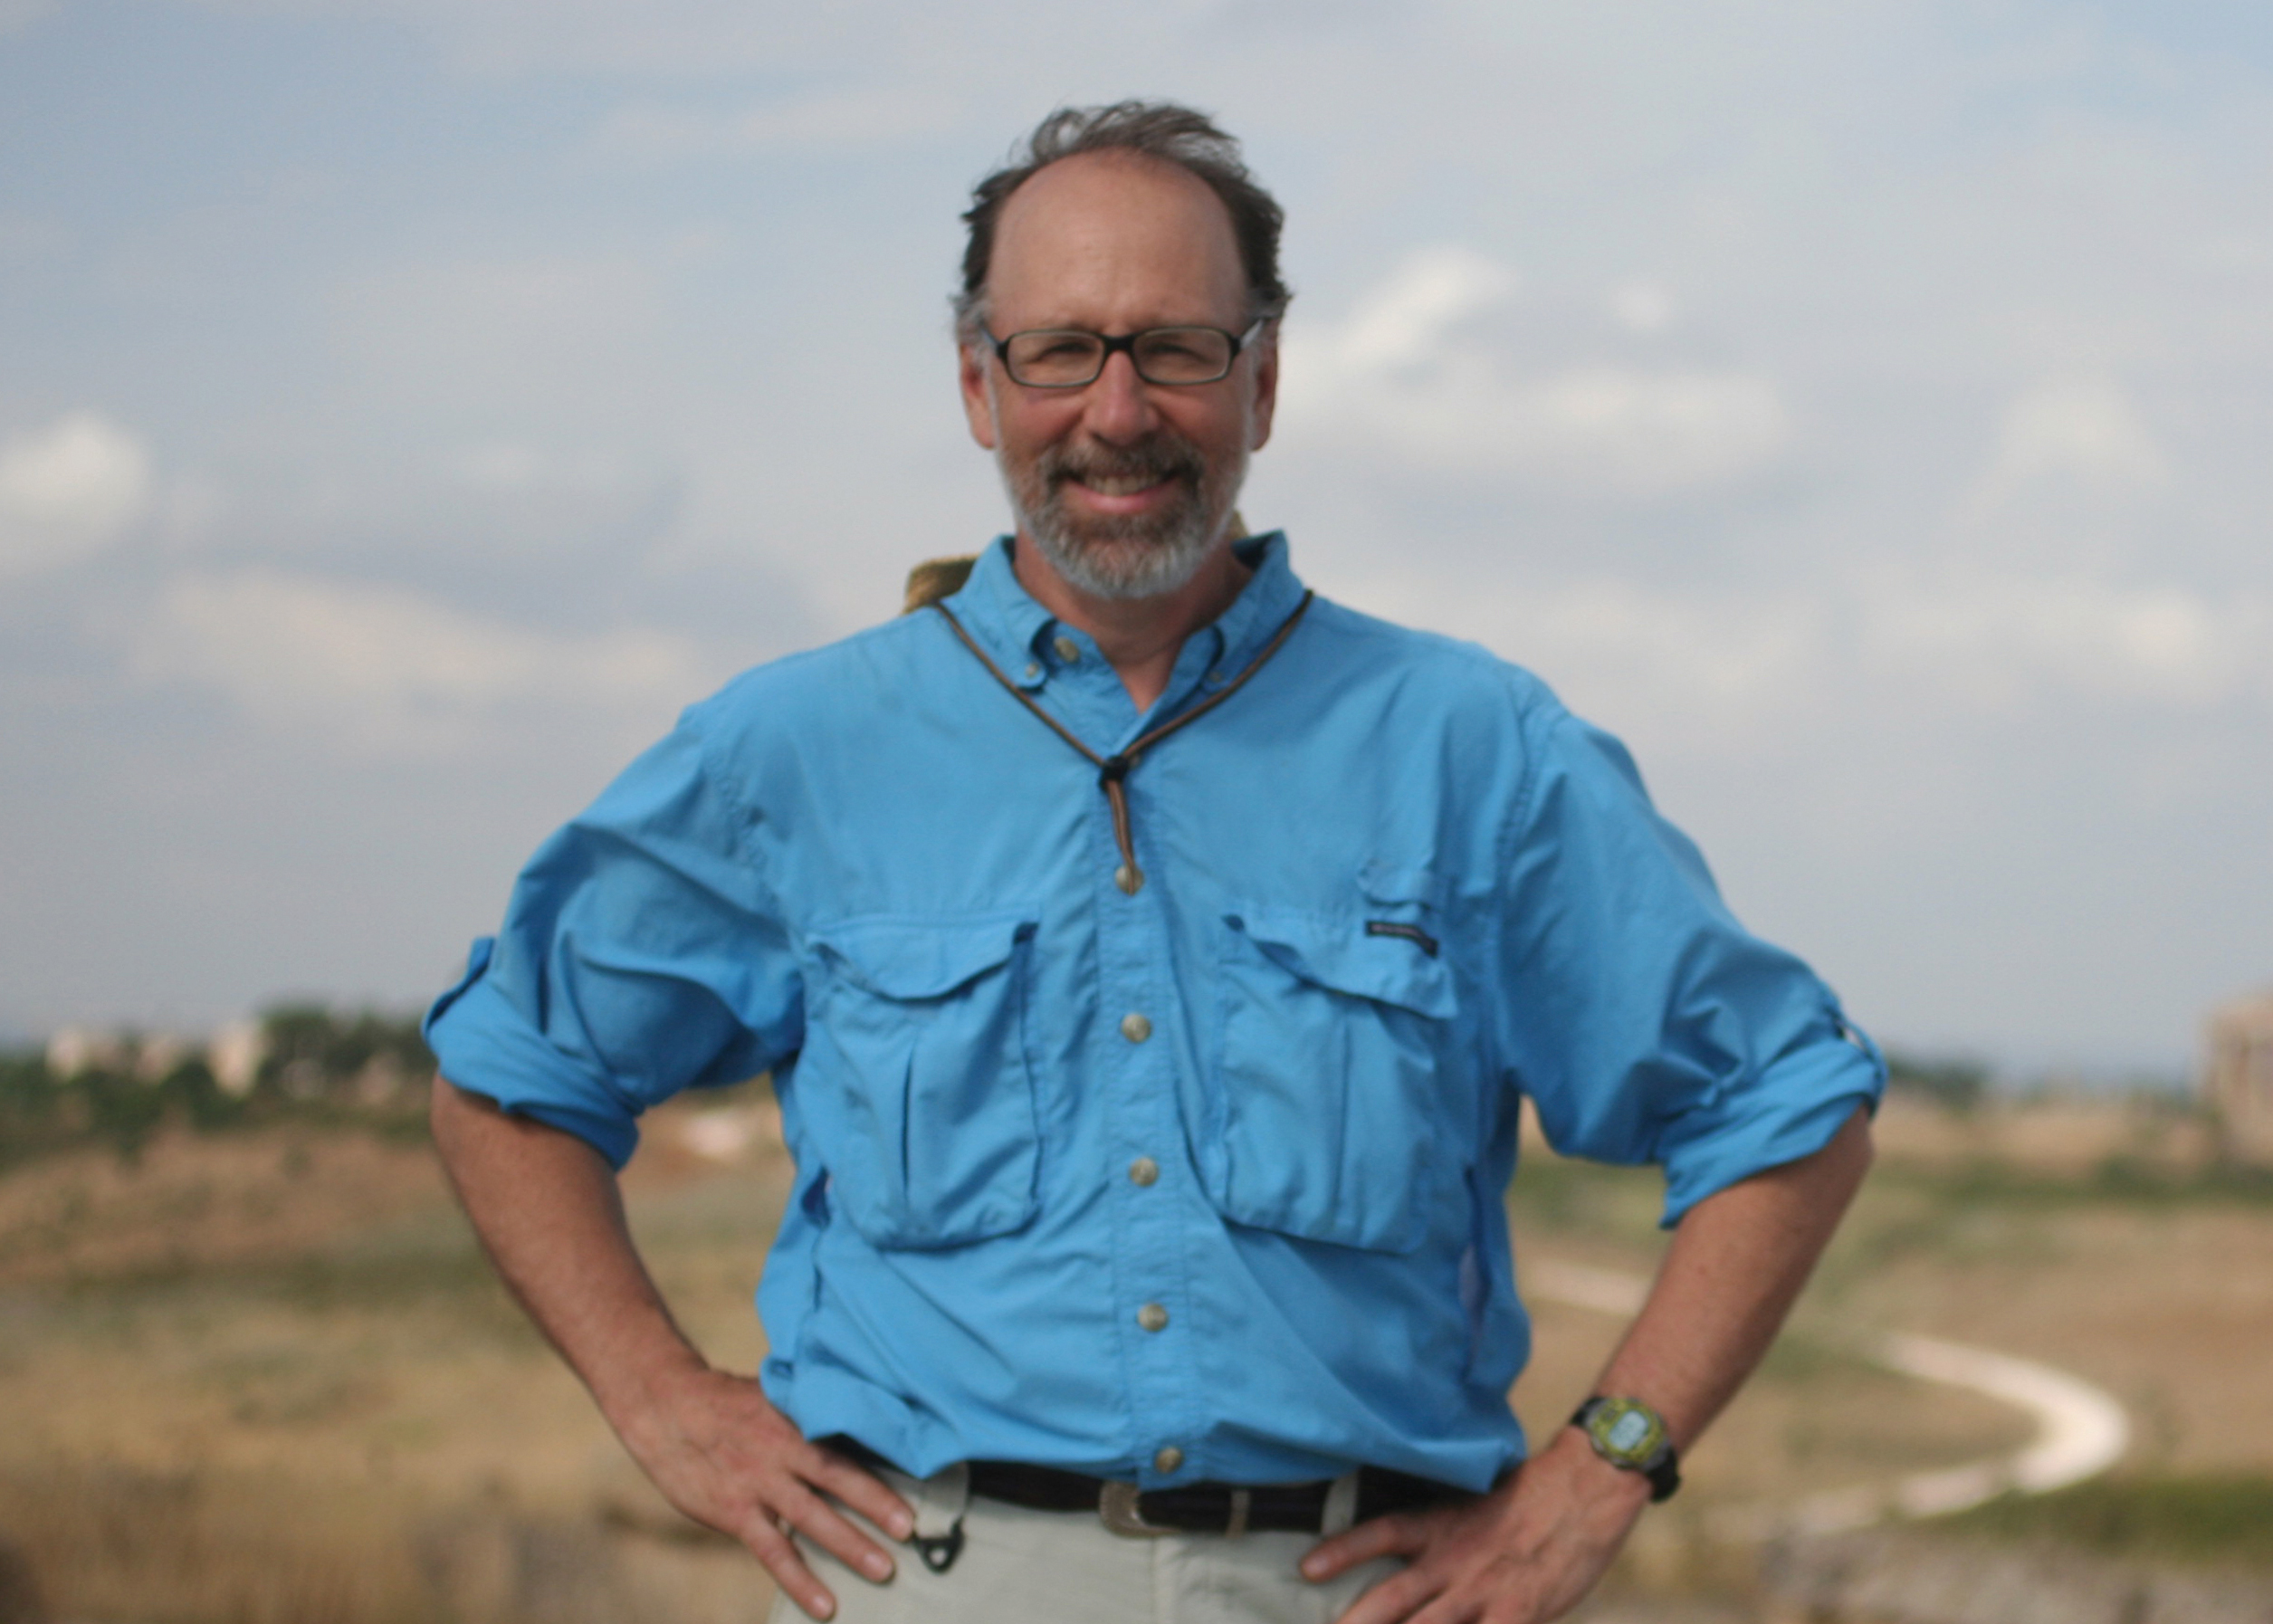 A older man in a blue shirt, glasses, and hands on his hips smiles at the camera